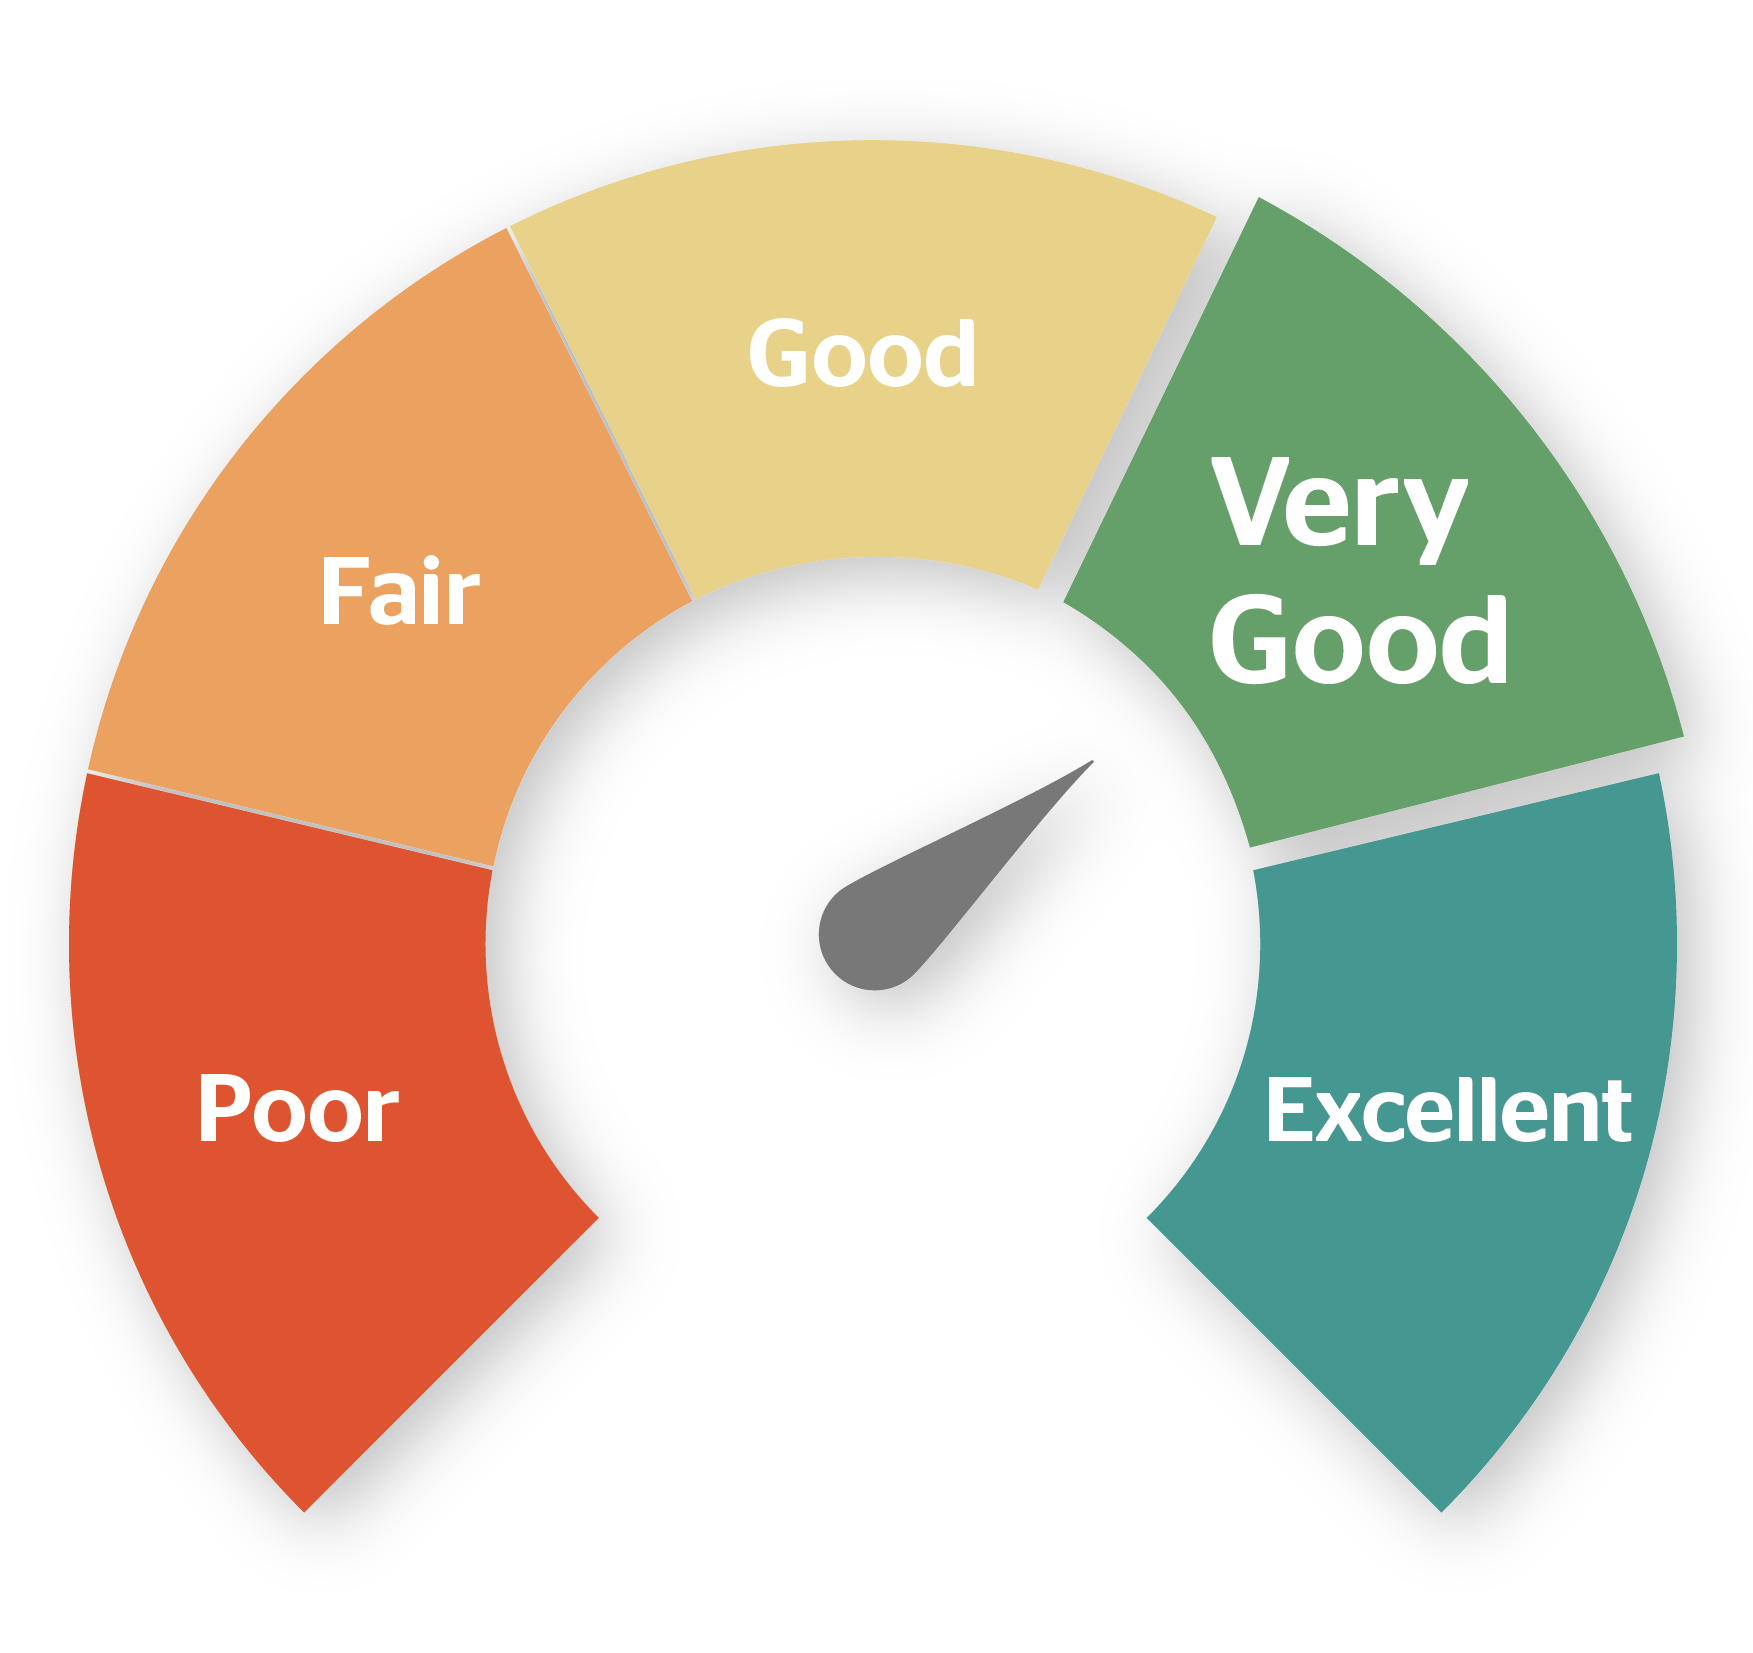 3 Ways to Improve Your Credit Score - The Finance Genie